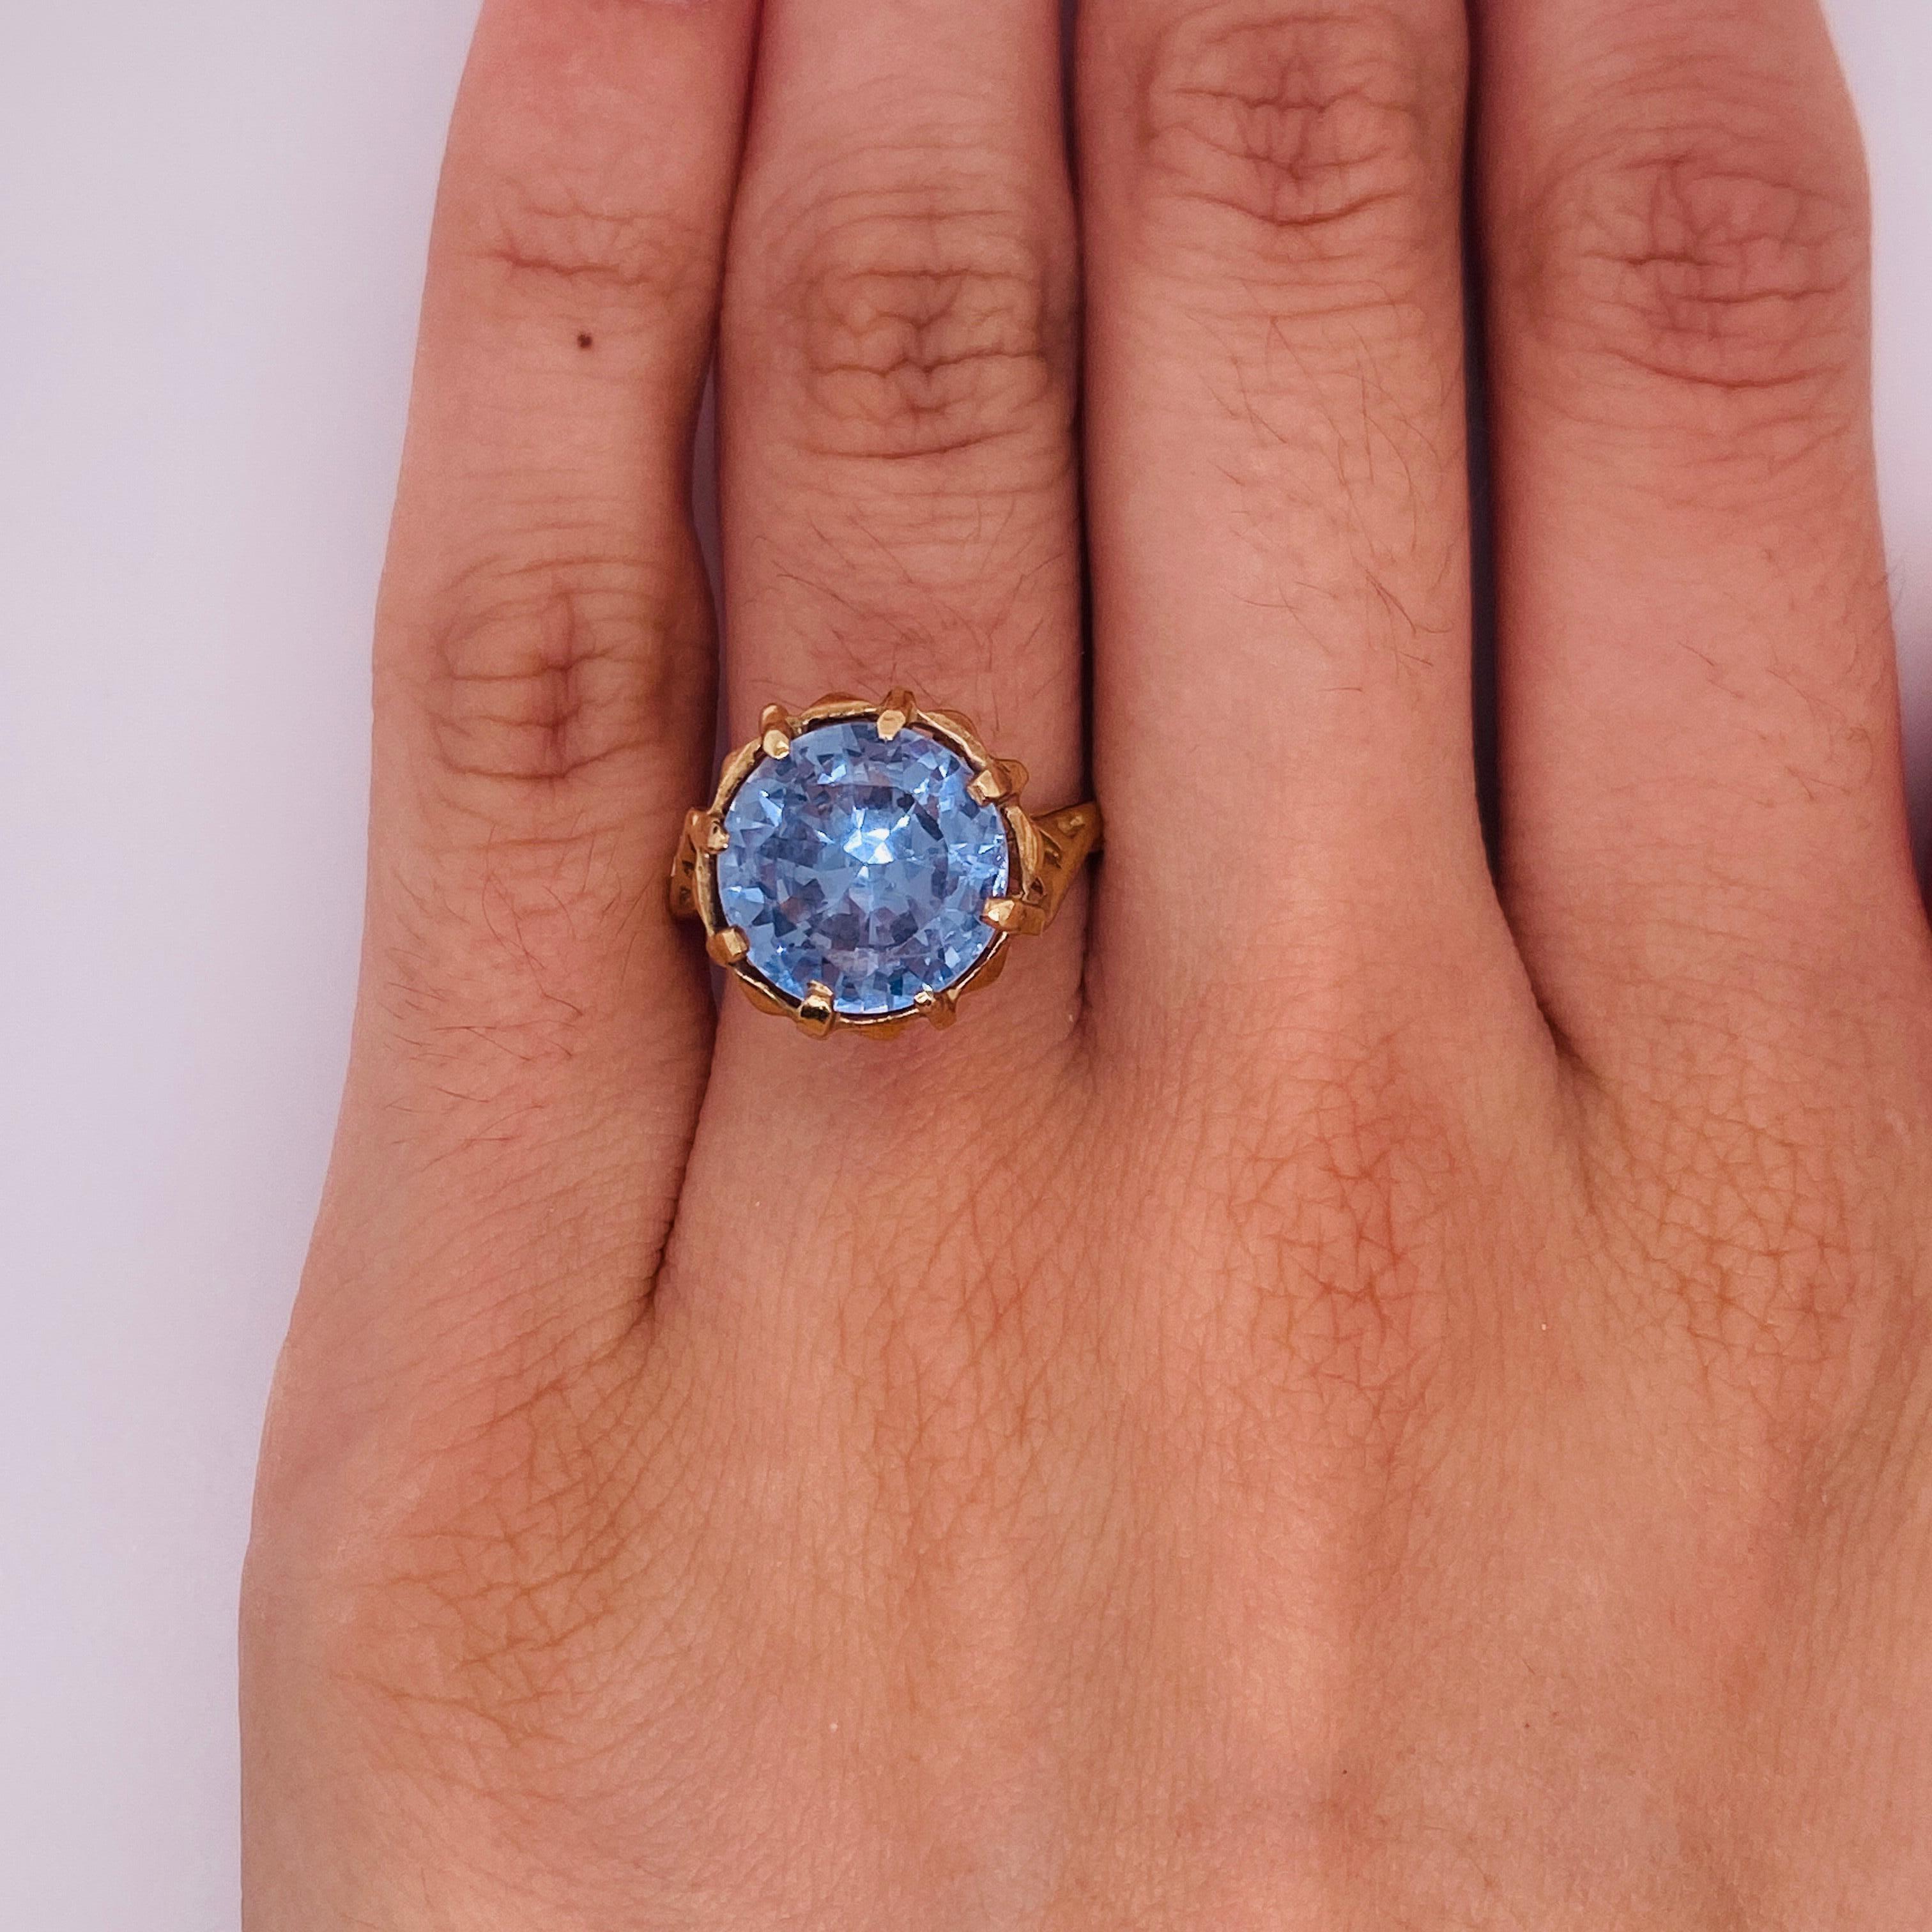 This vintage ring is an architectural stunner! The 6.25 carat blue zircon mesmerizes with sparkles and depth. Iconic geometric shapes are everywhere in this vintage winner!  From an angle, the ring structure comes alive! Spiral cathedral styling